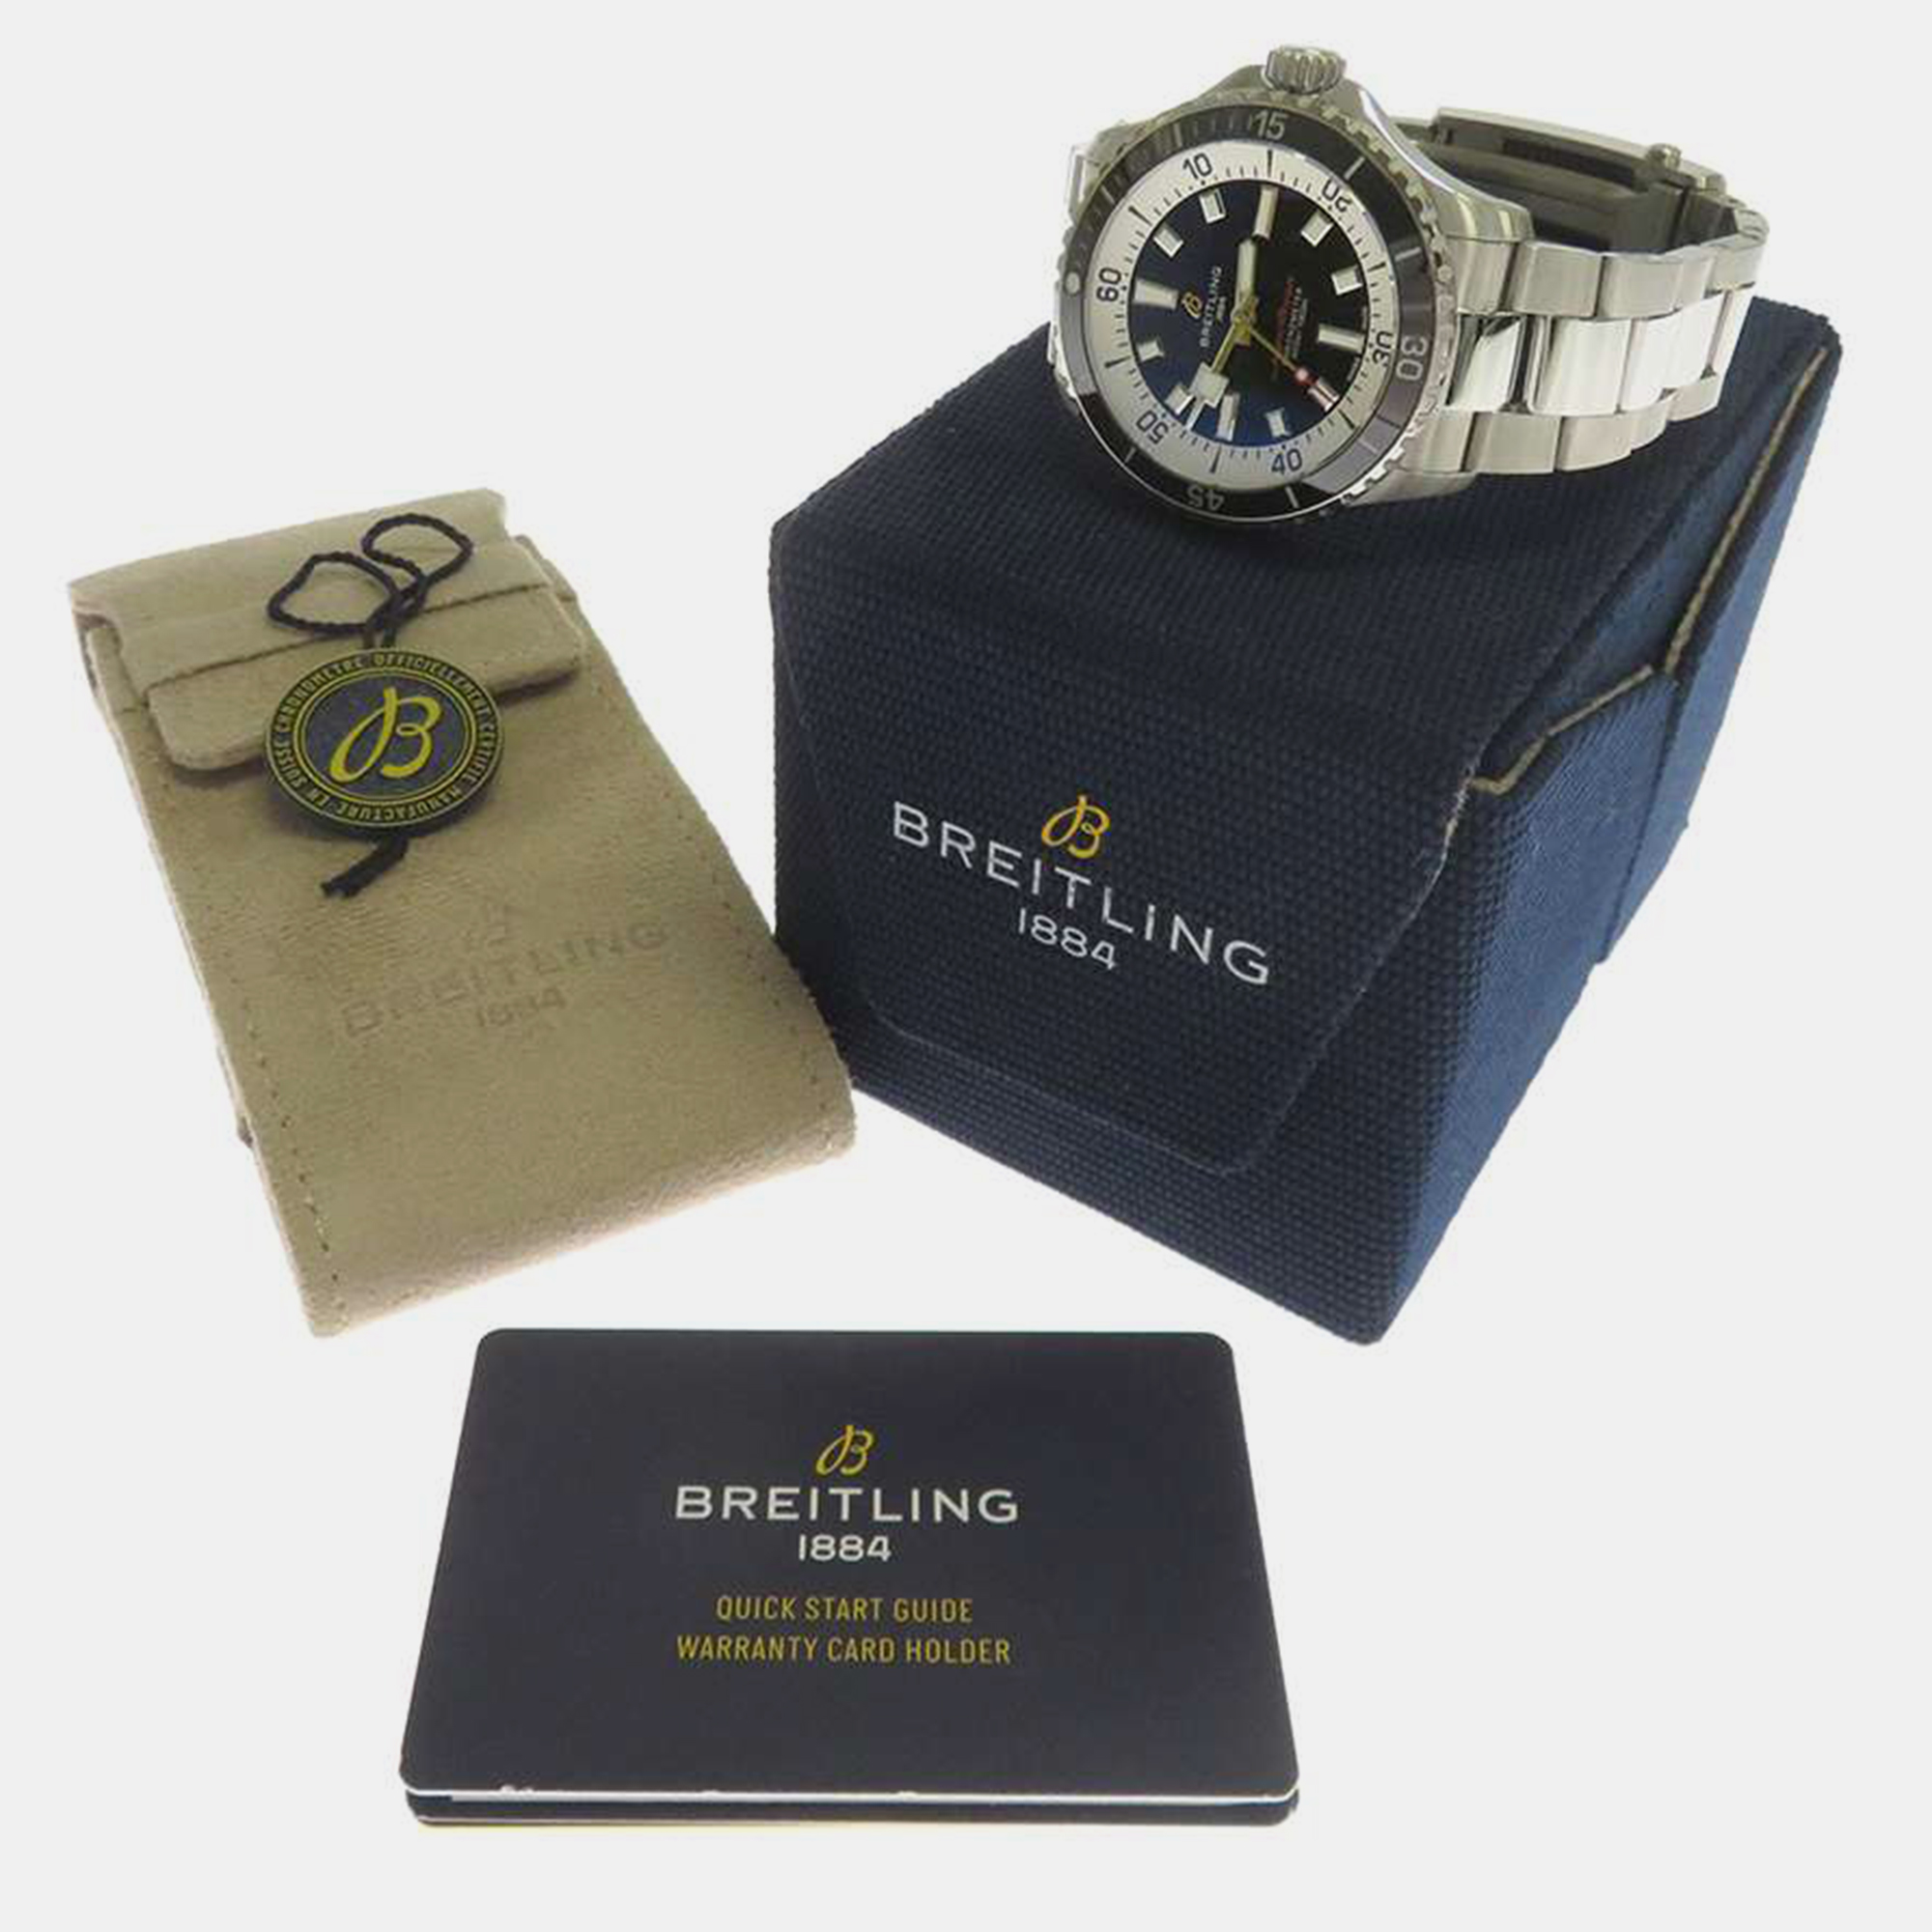 Breitling Black Stainless Steel Superocean A17375211B1A1 Automatic Men's Wristwatch 42 Mm